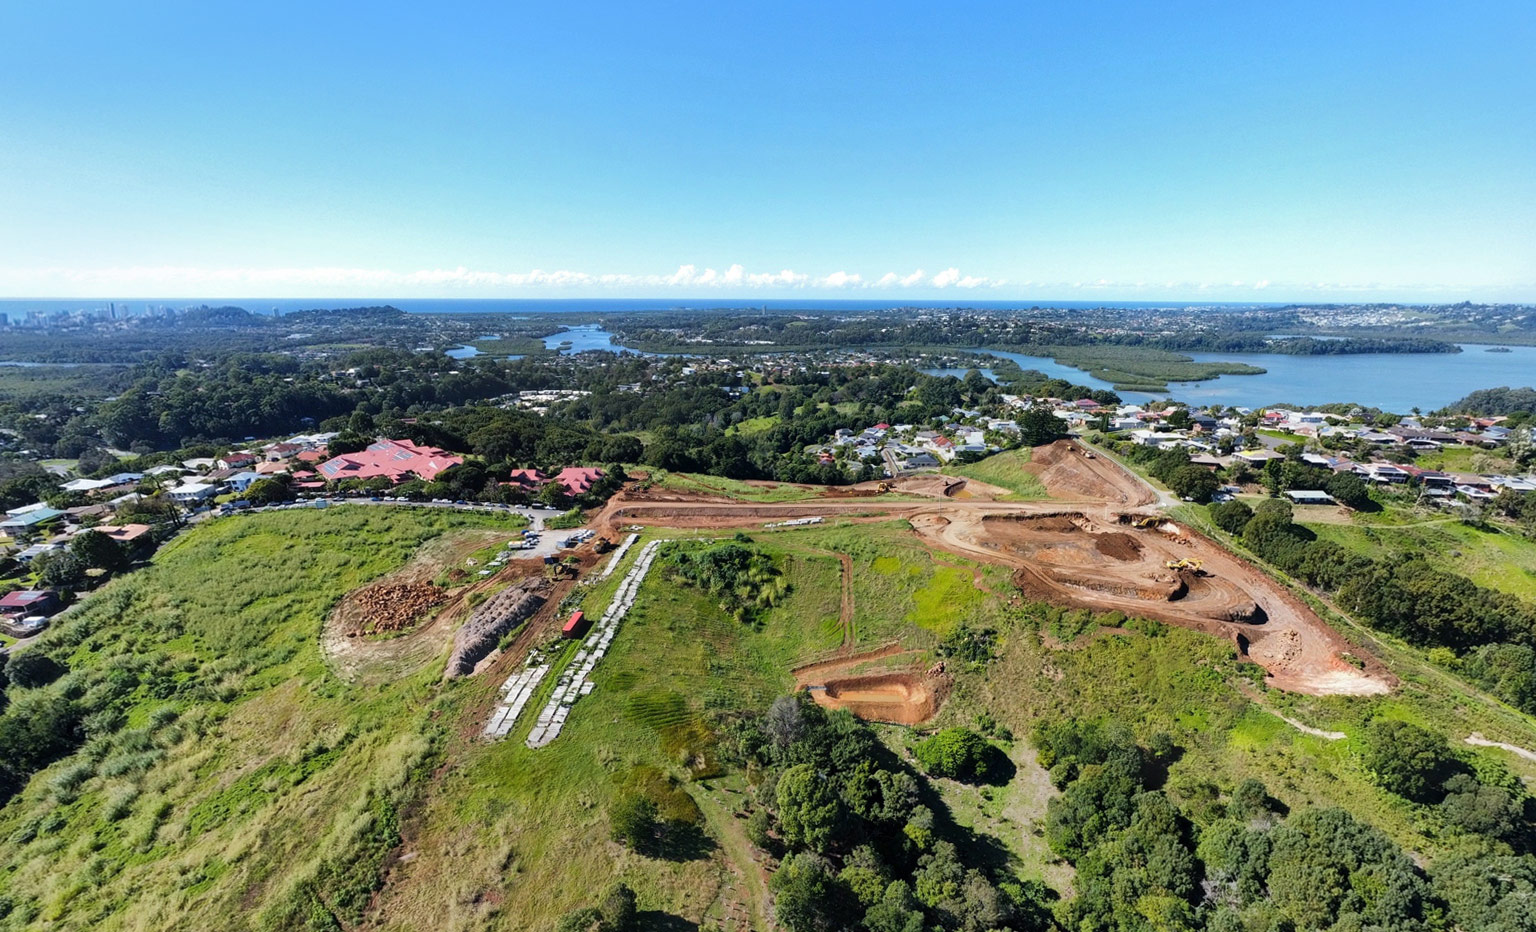 Tweed New Residential Land Estate Construction